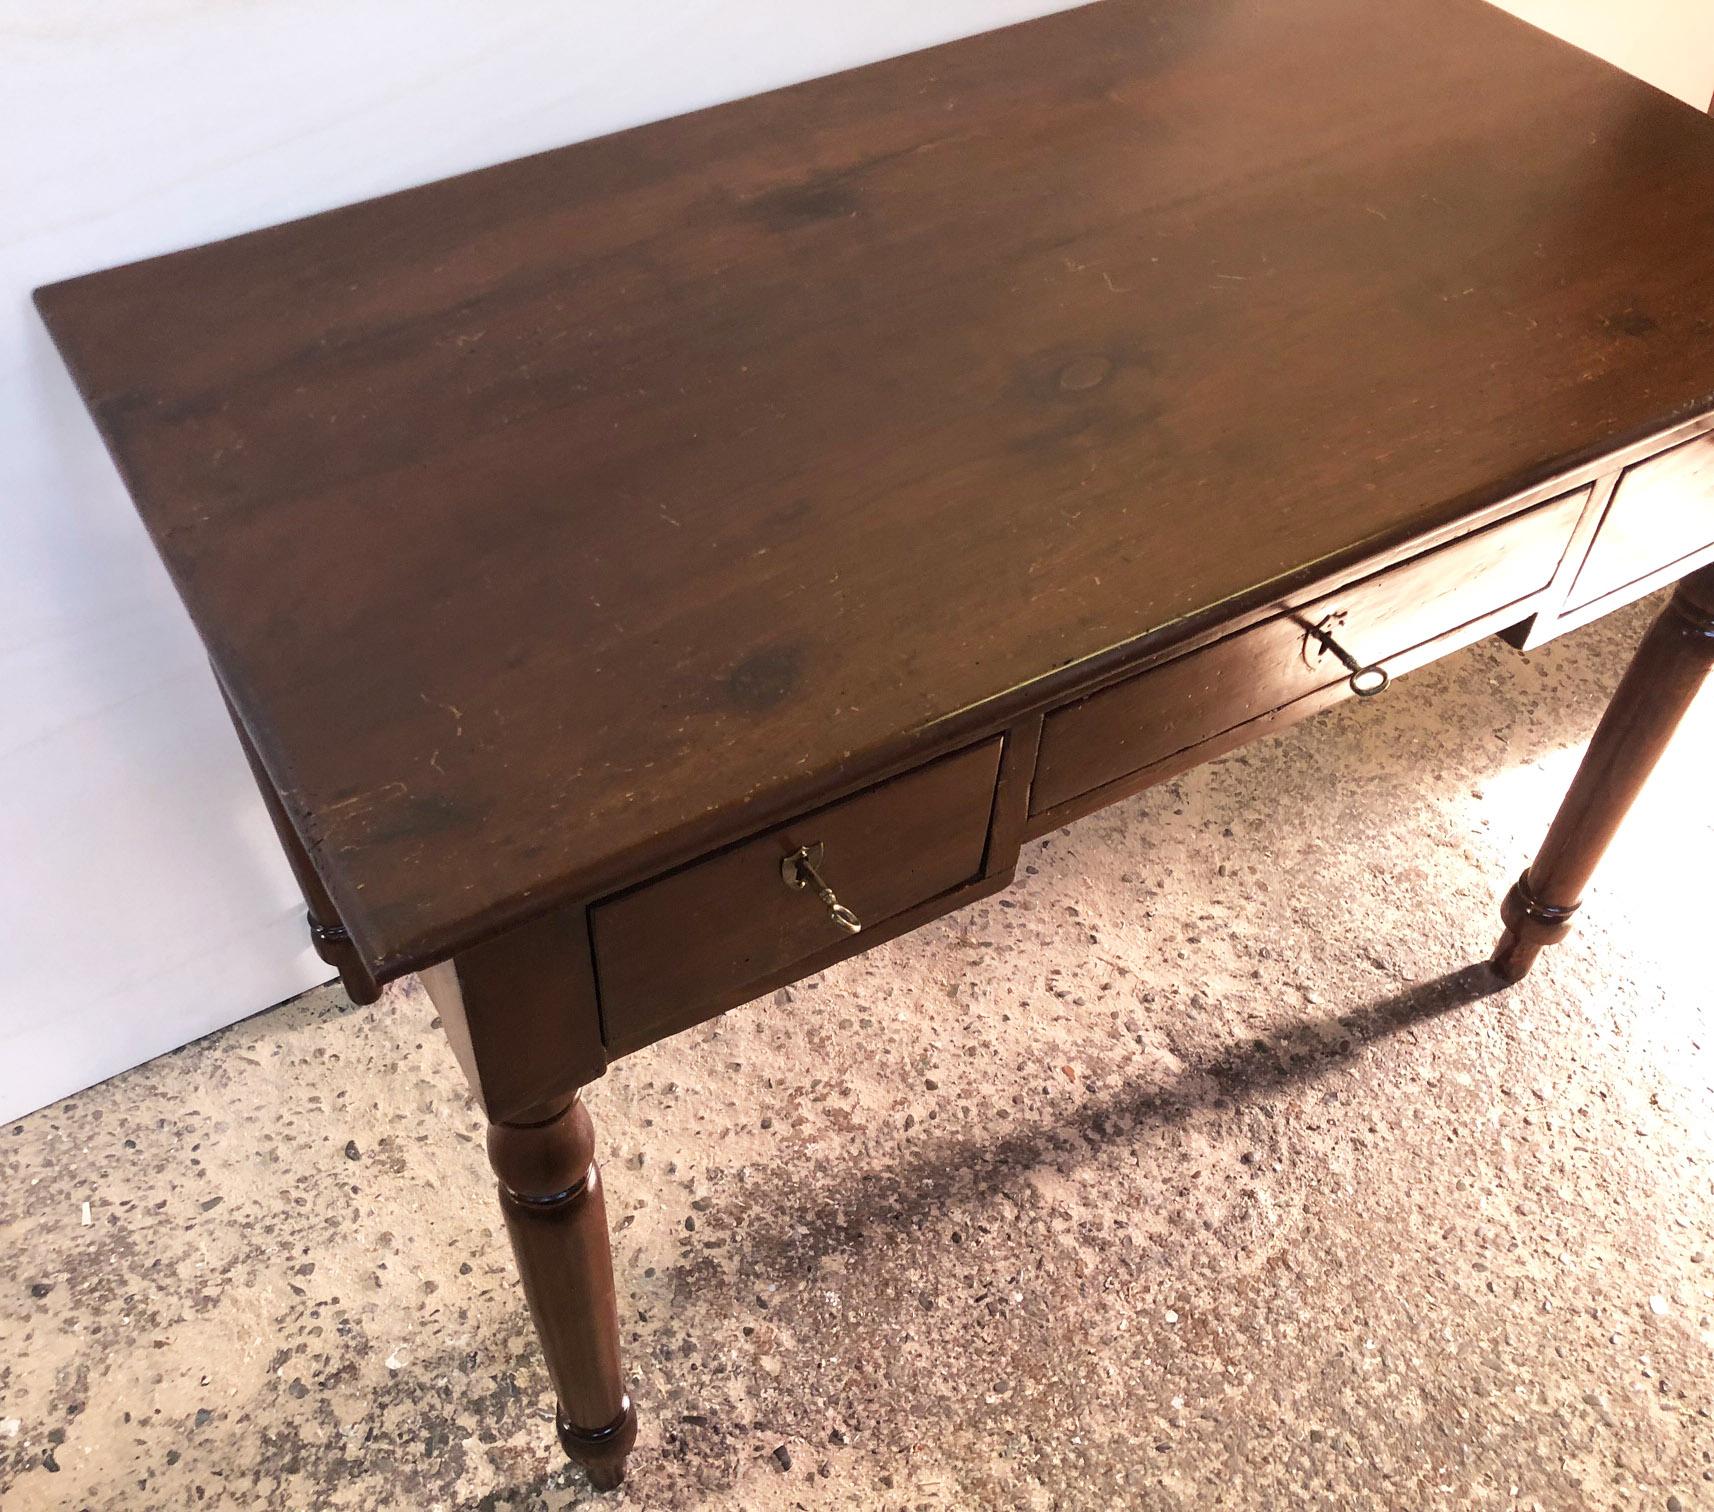 Rustic Original Italian Desk in Walnut and Fir, with Three Drawers, Turned Leg For Sale